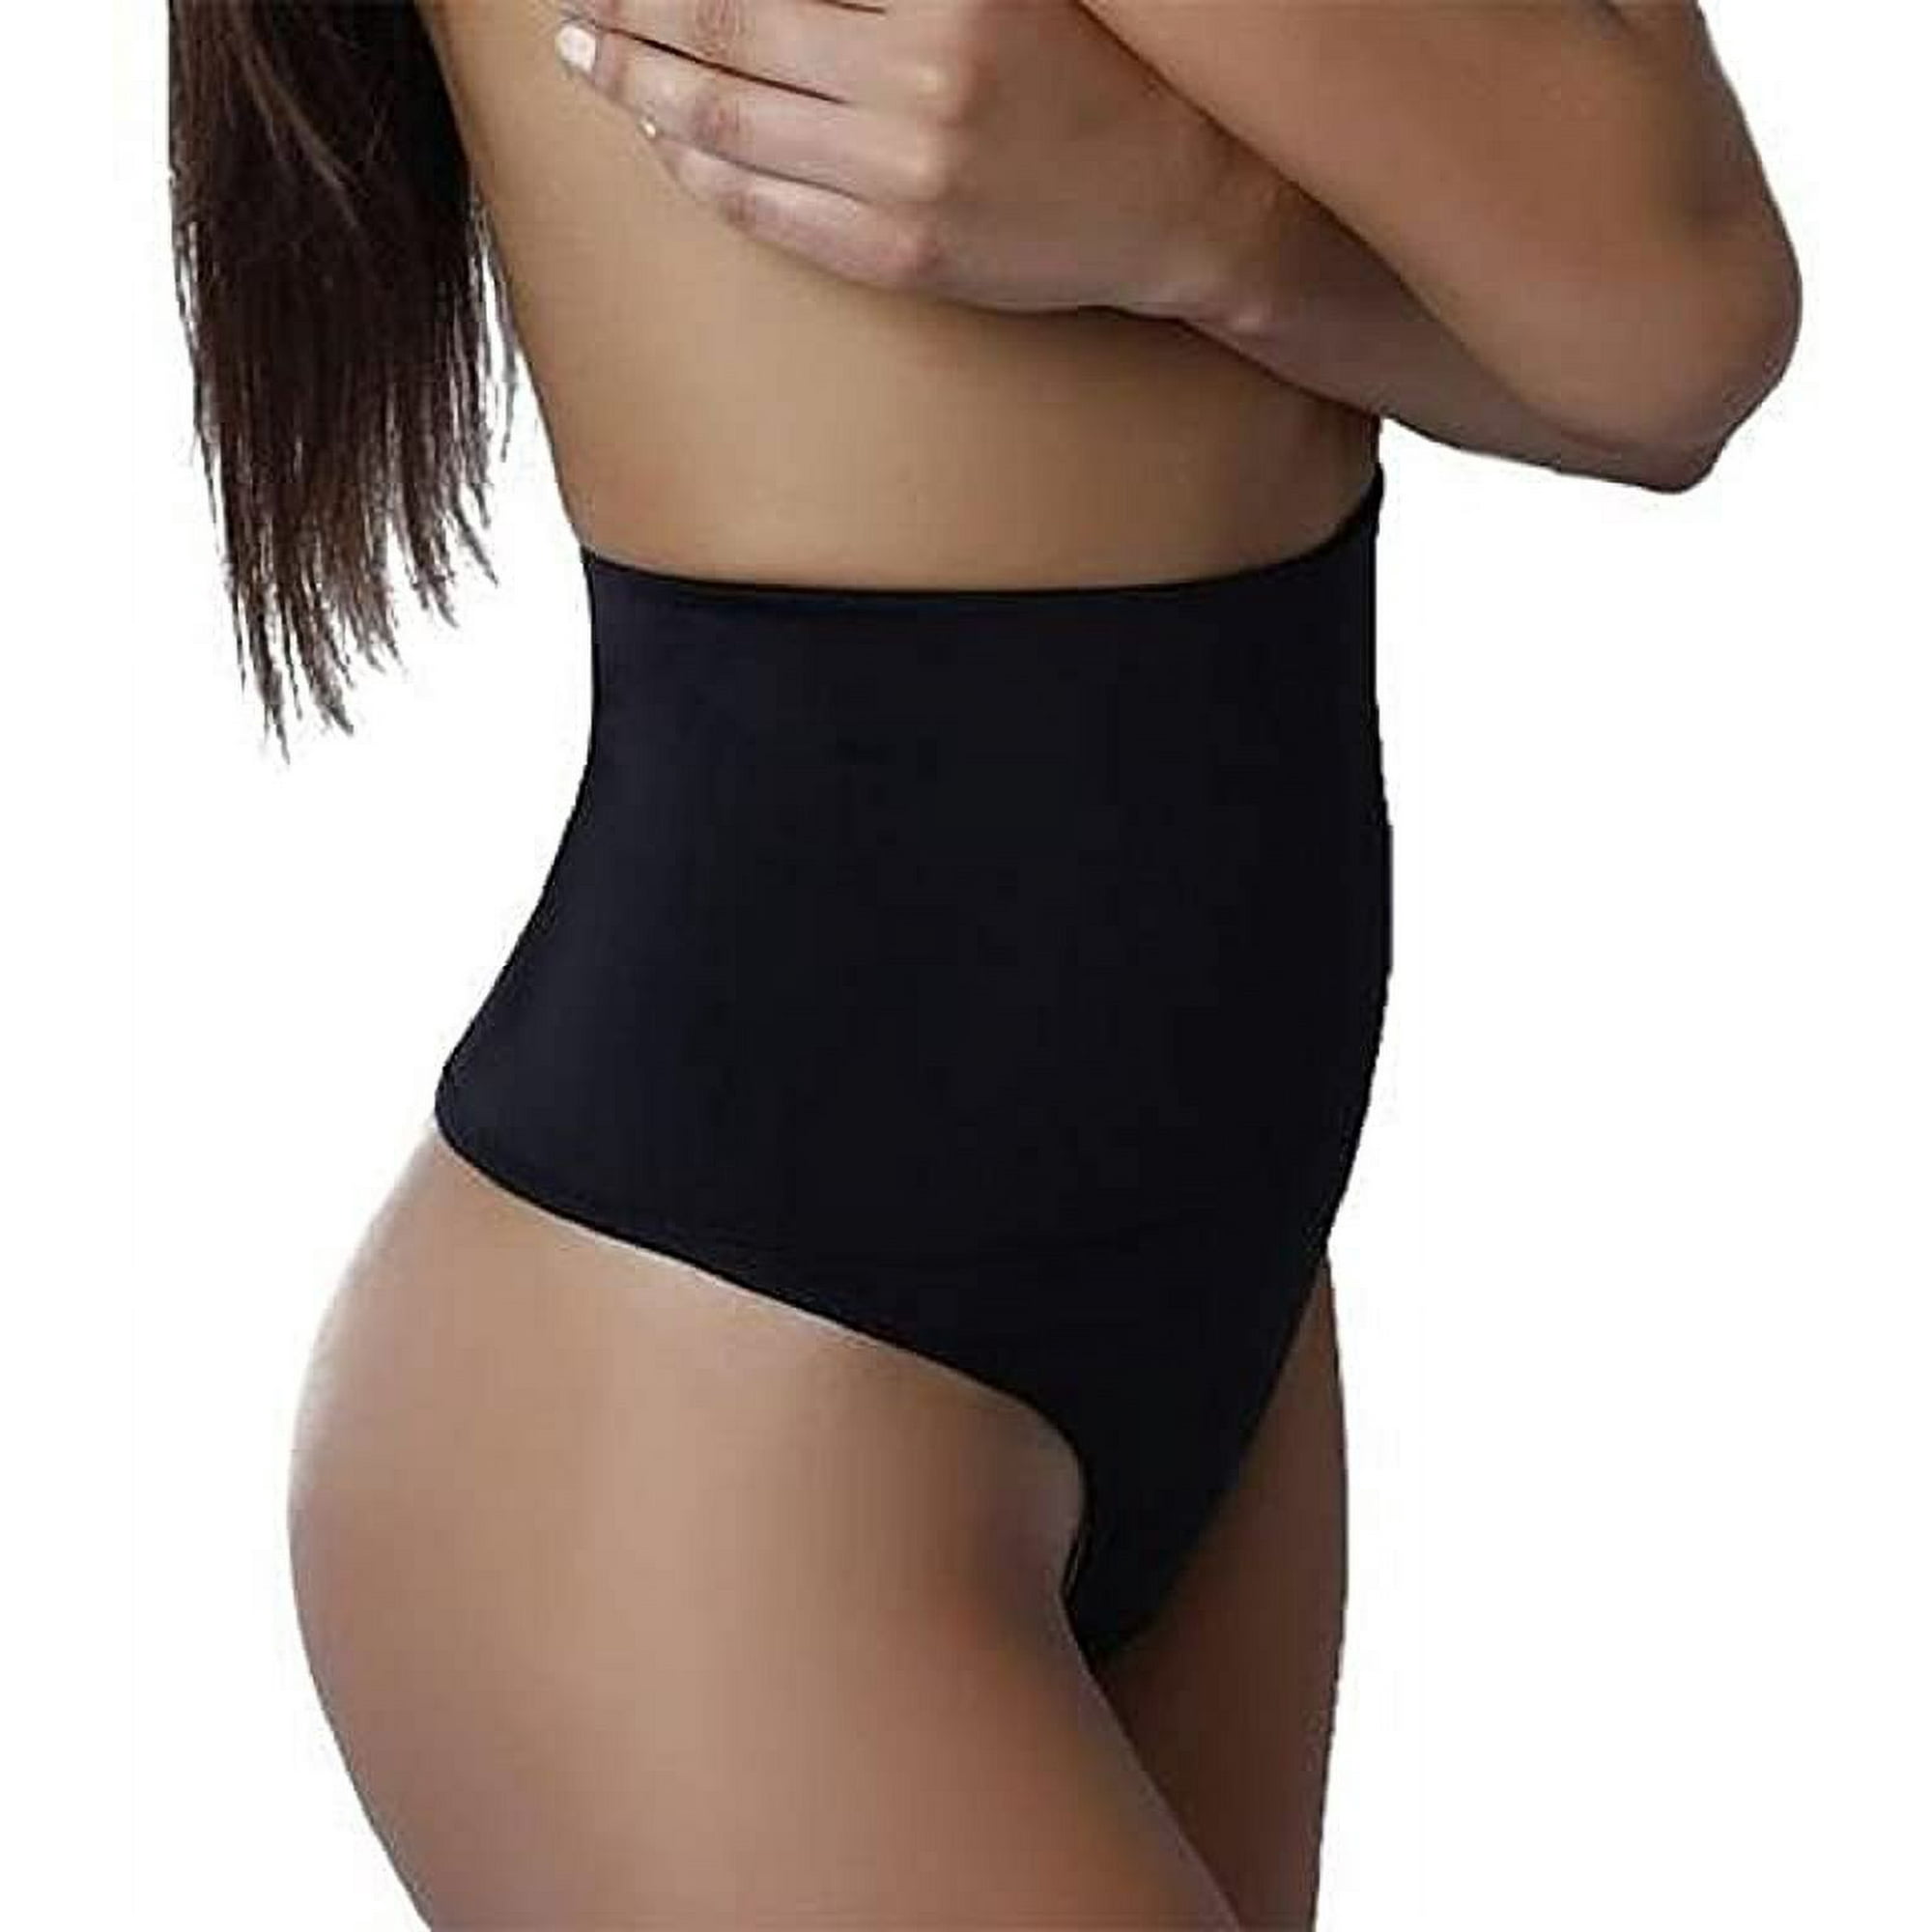 BODYSLIMMERS NANCY GANZ Women's Secretly Naked Control Shaping Thong Panty with Belly Band, Black, XXXX-Large/22 - Walmart.com